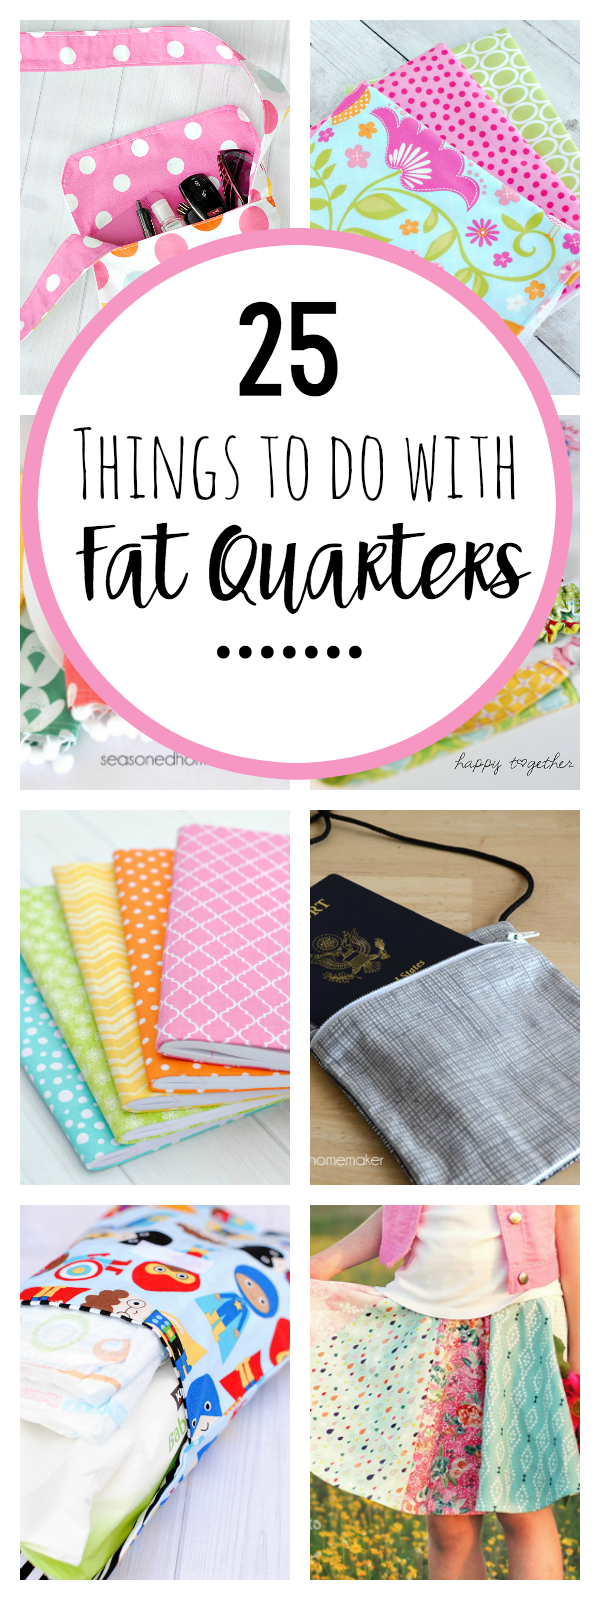 14 fabric crafts Projects fat quarters ideas